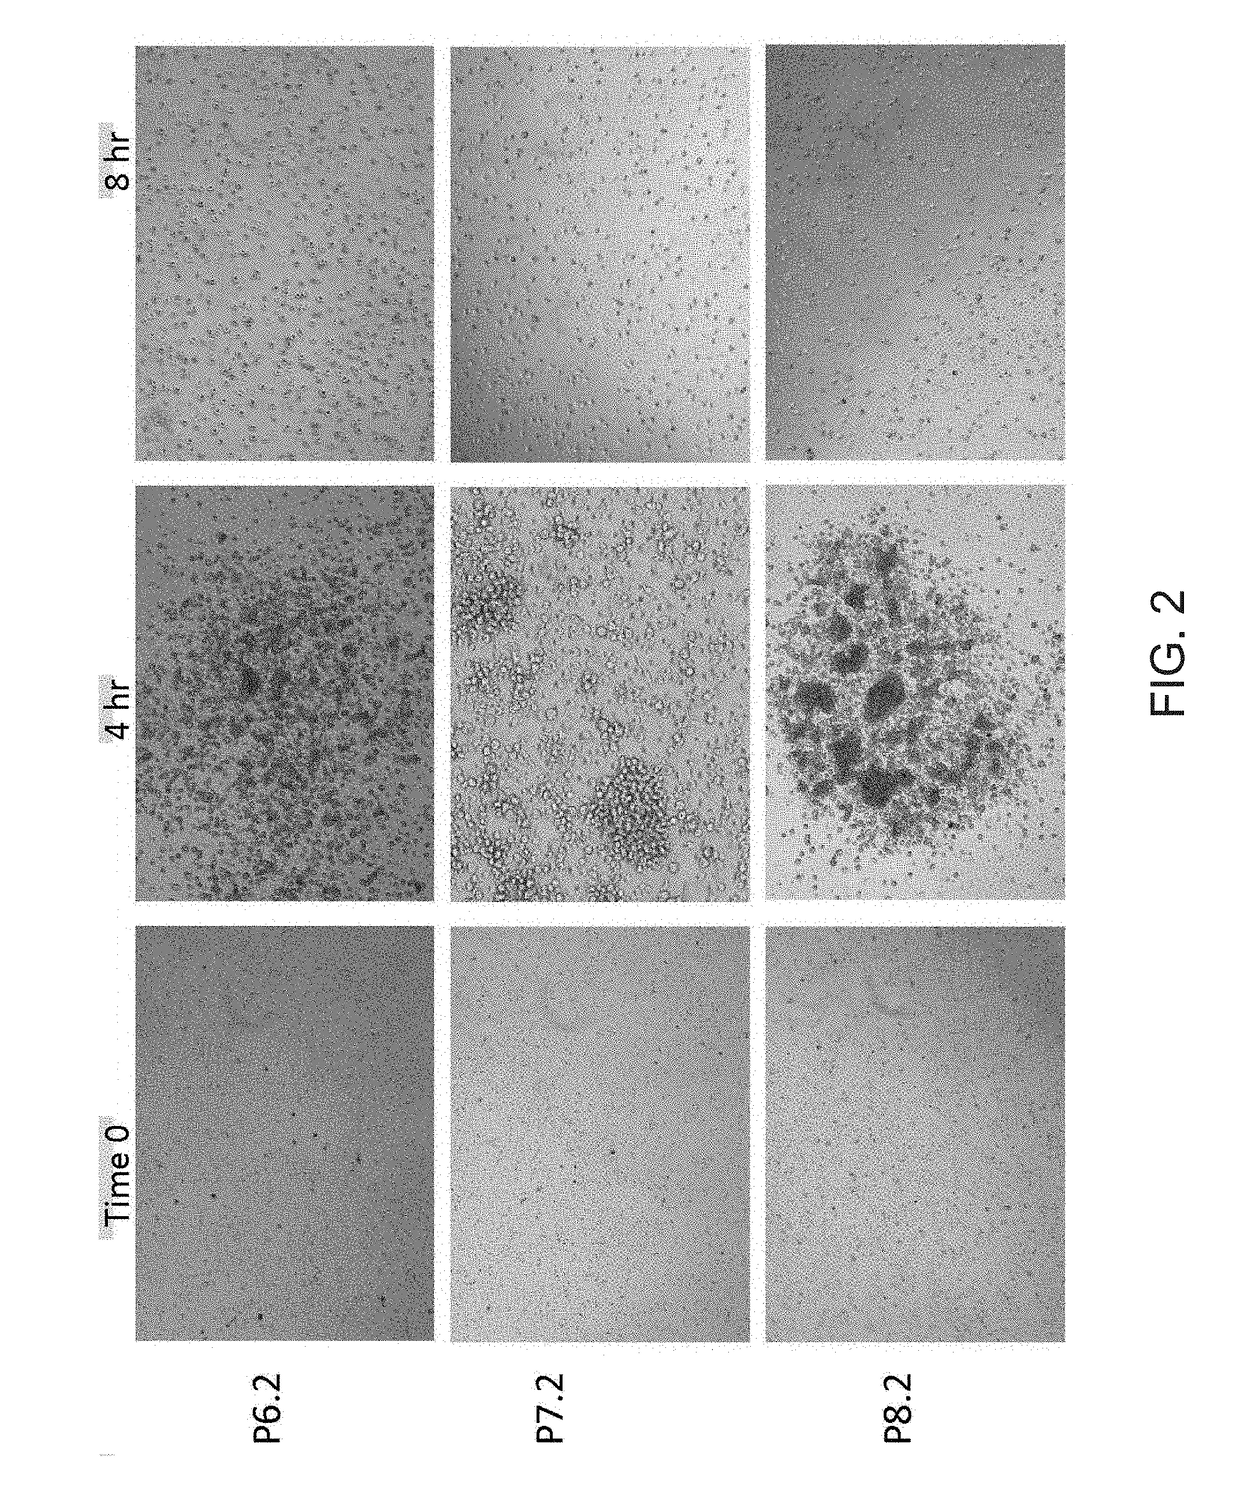 Methods of mesenchymal stem cell mobilization and expansion